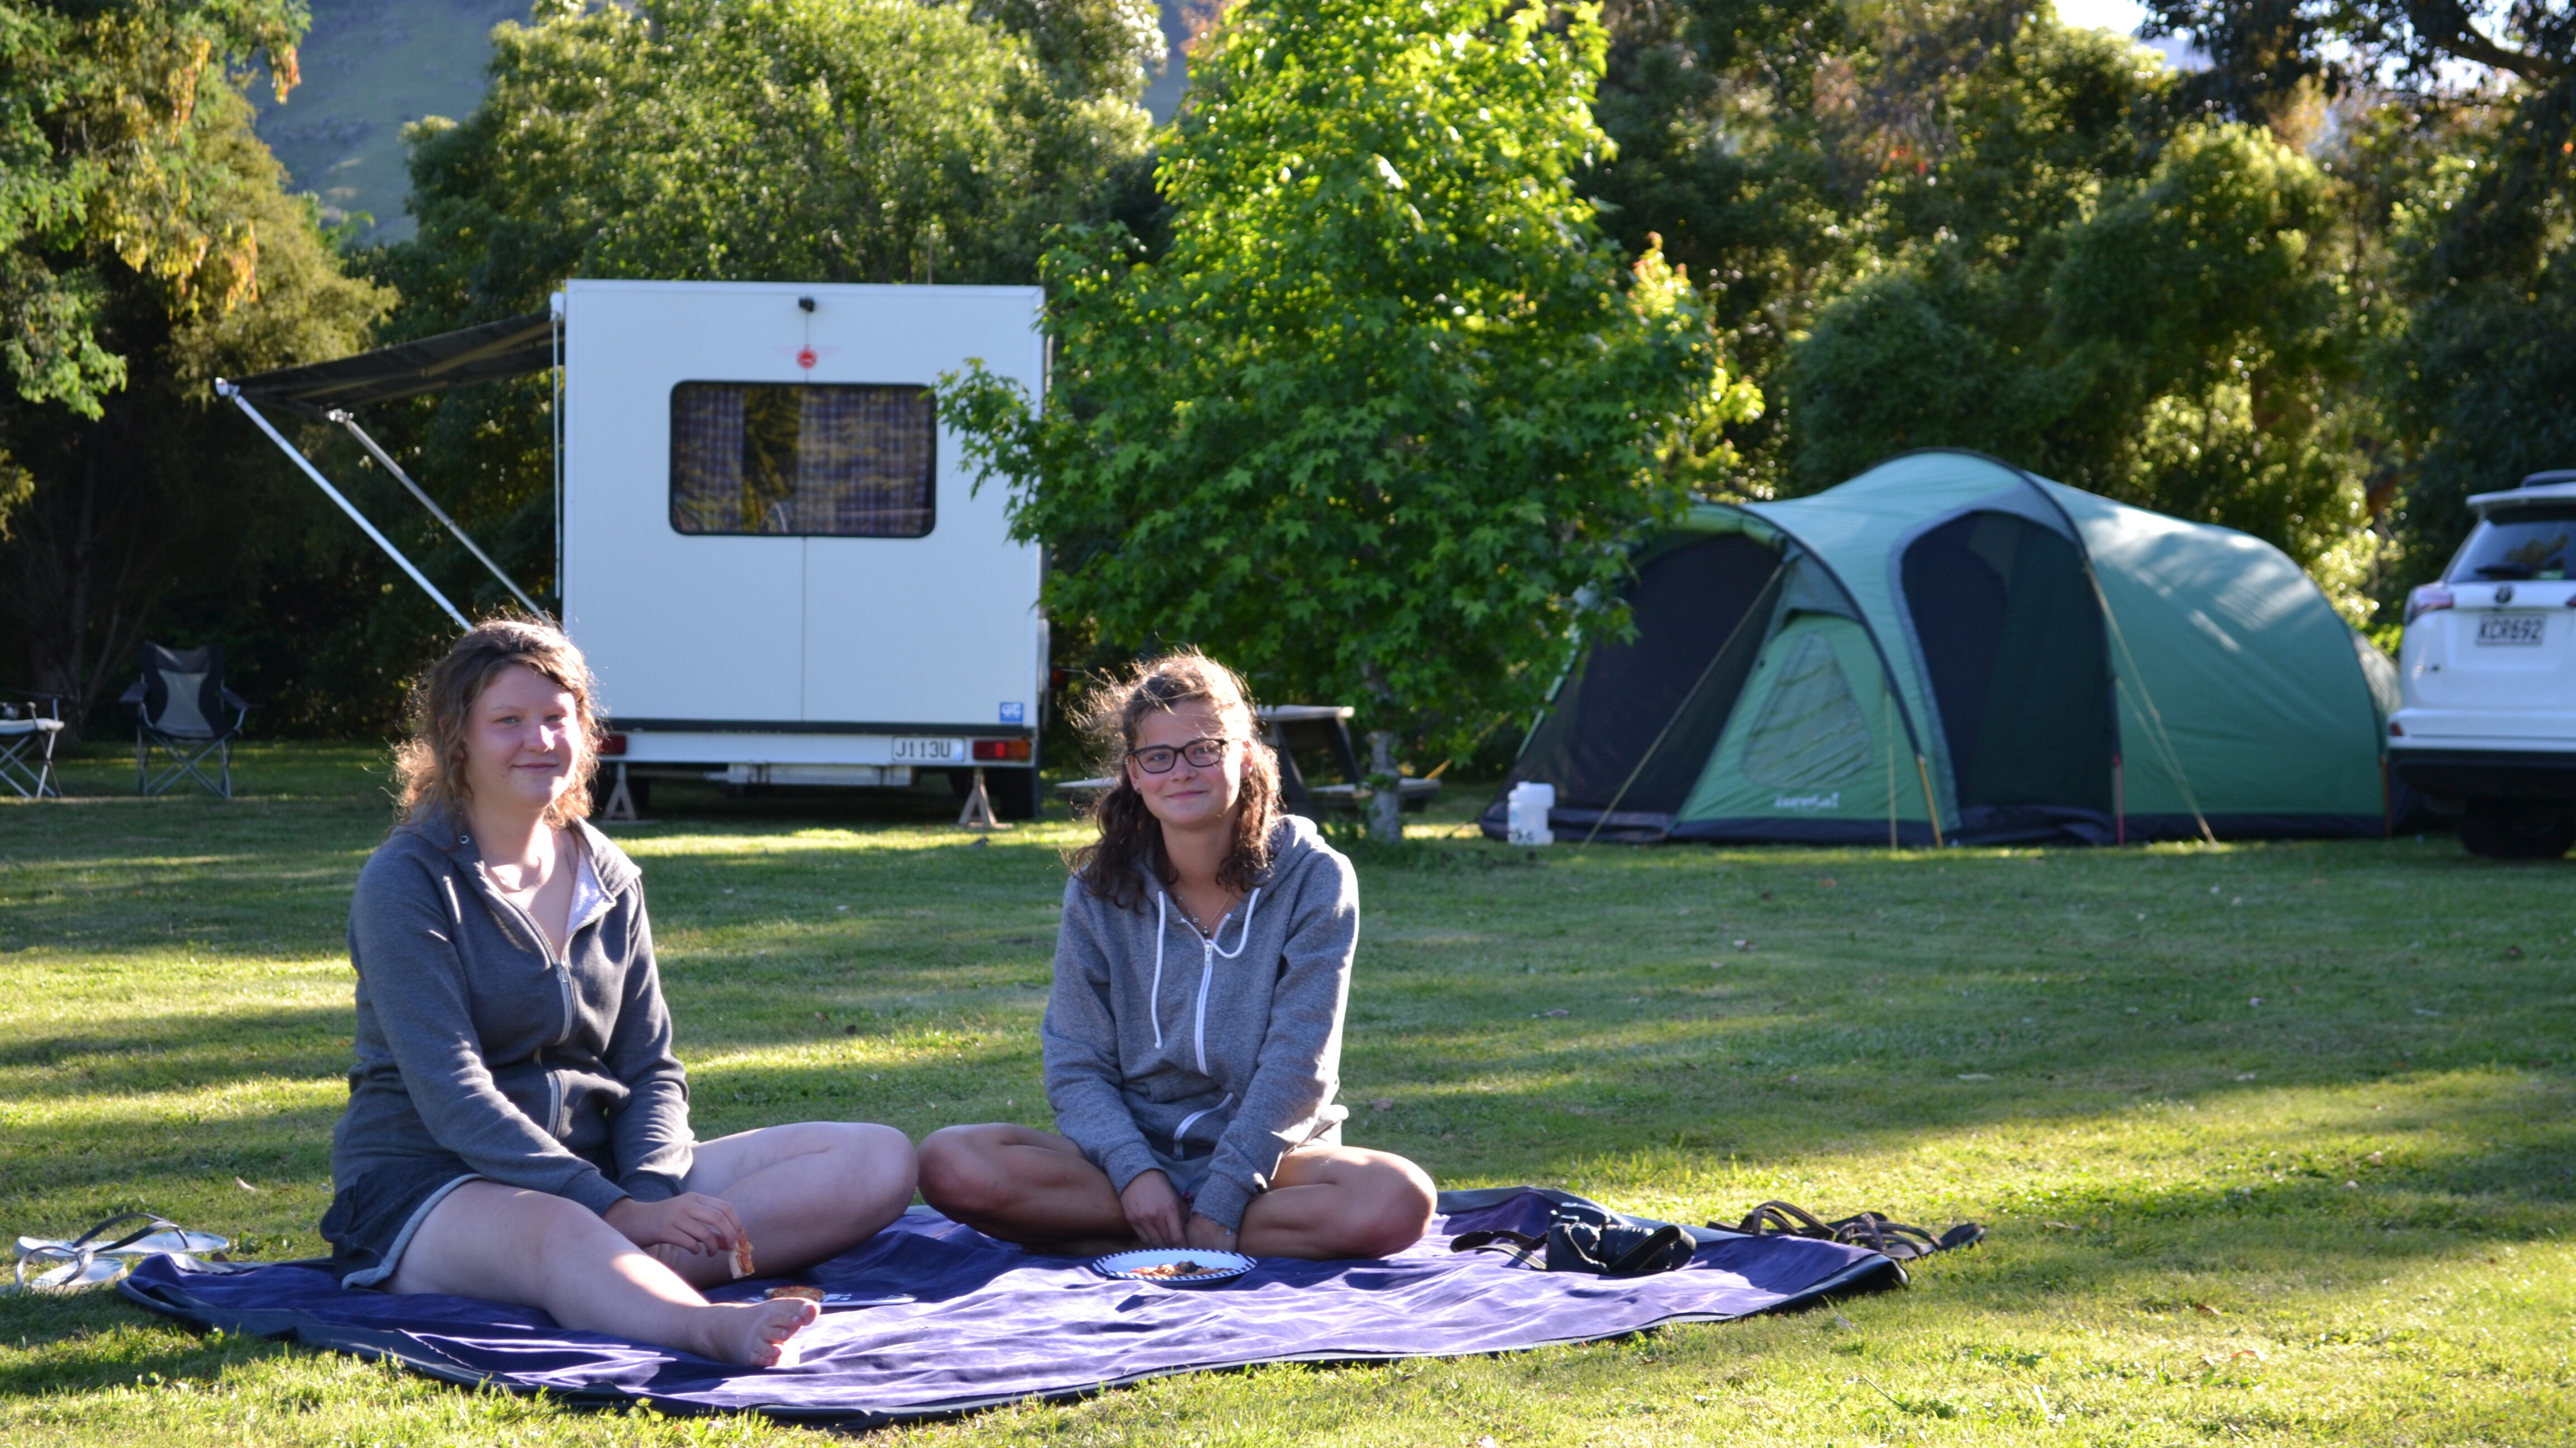 Campers relax at Smiths Farm Holiday Park.